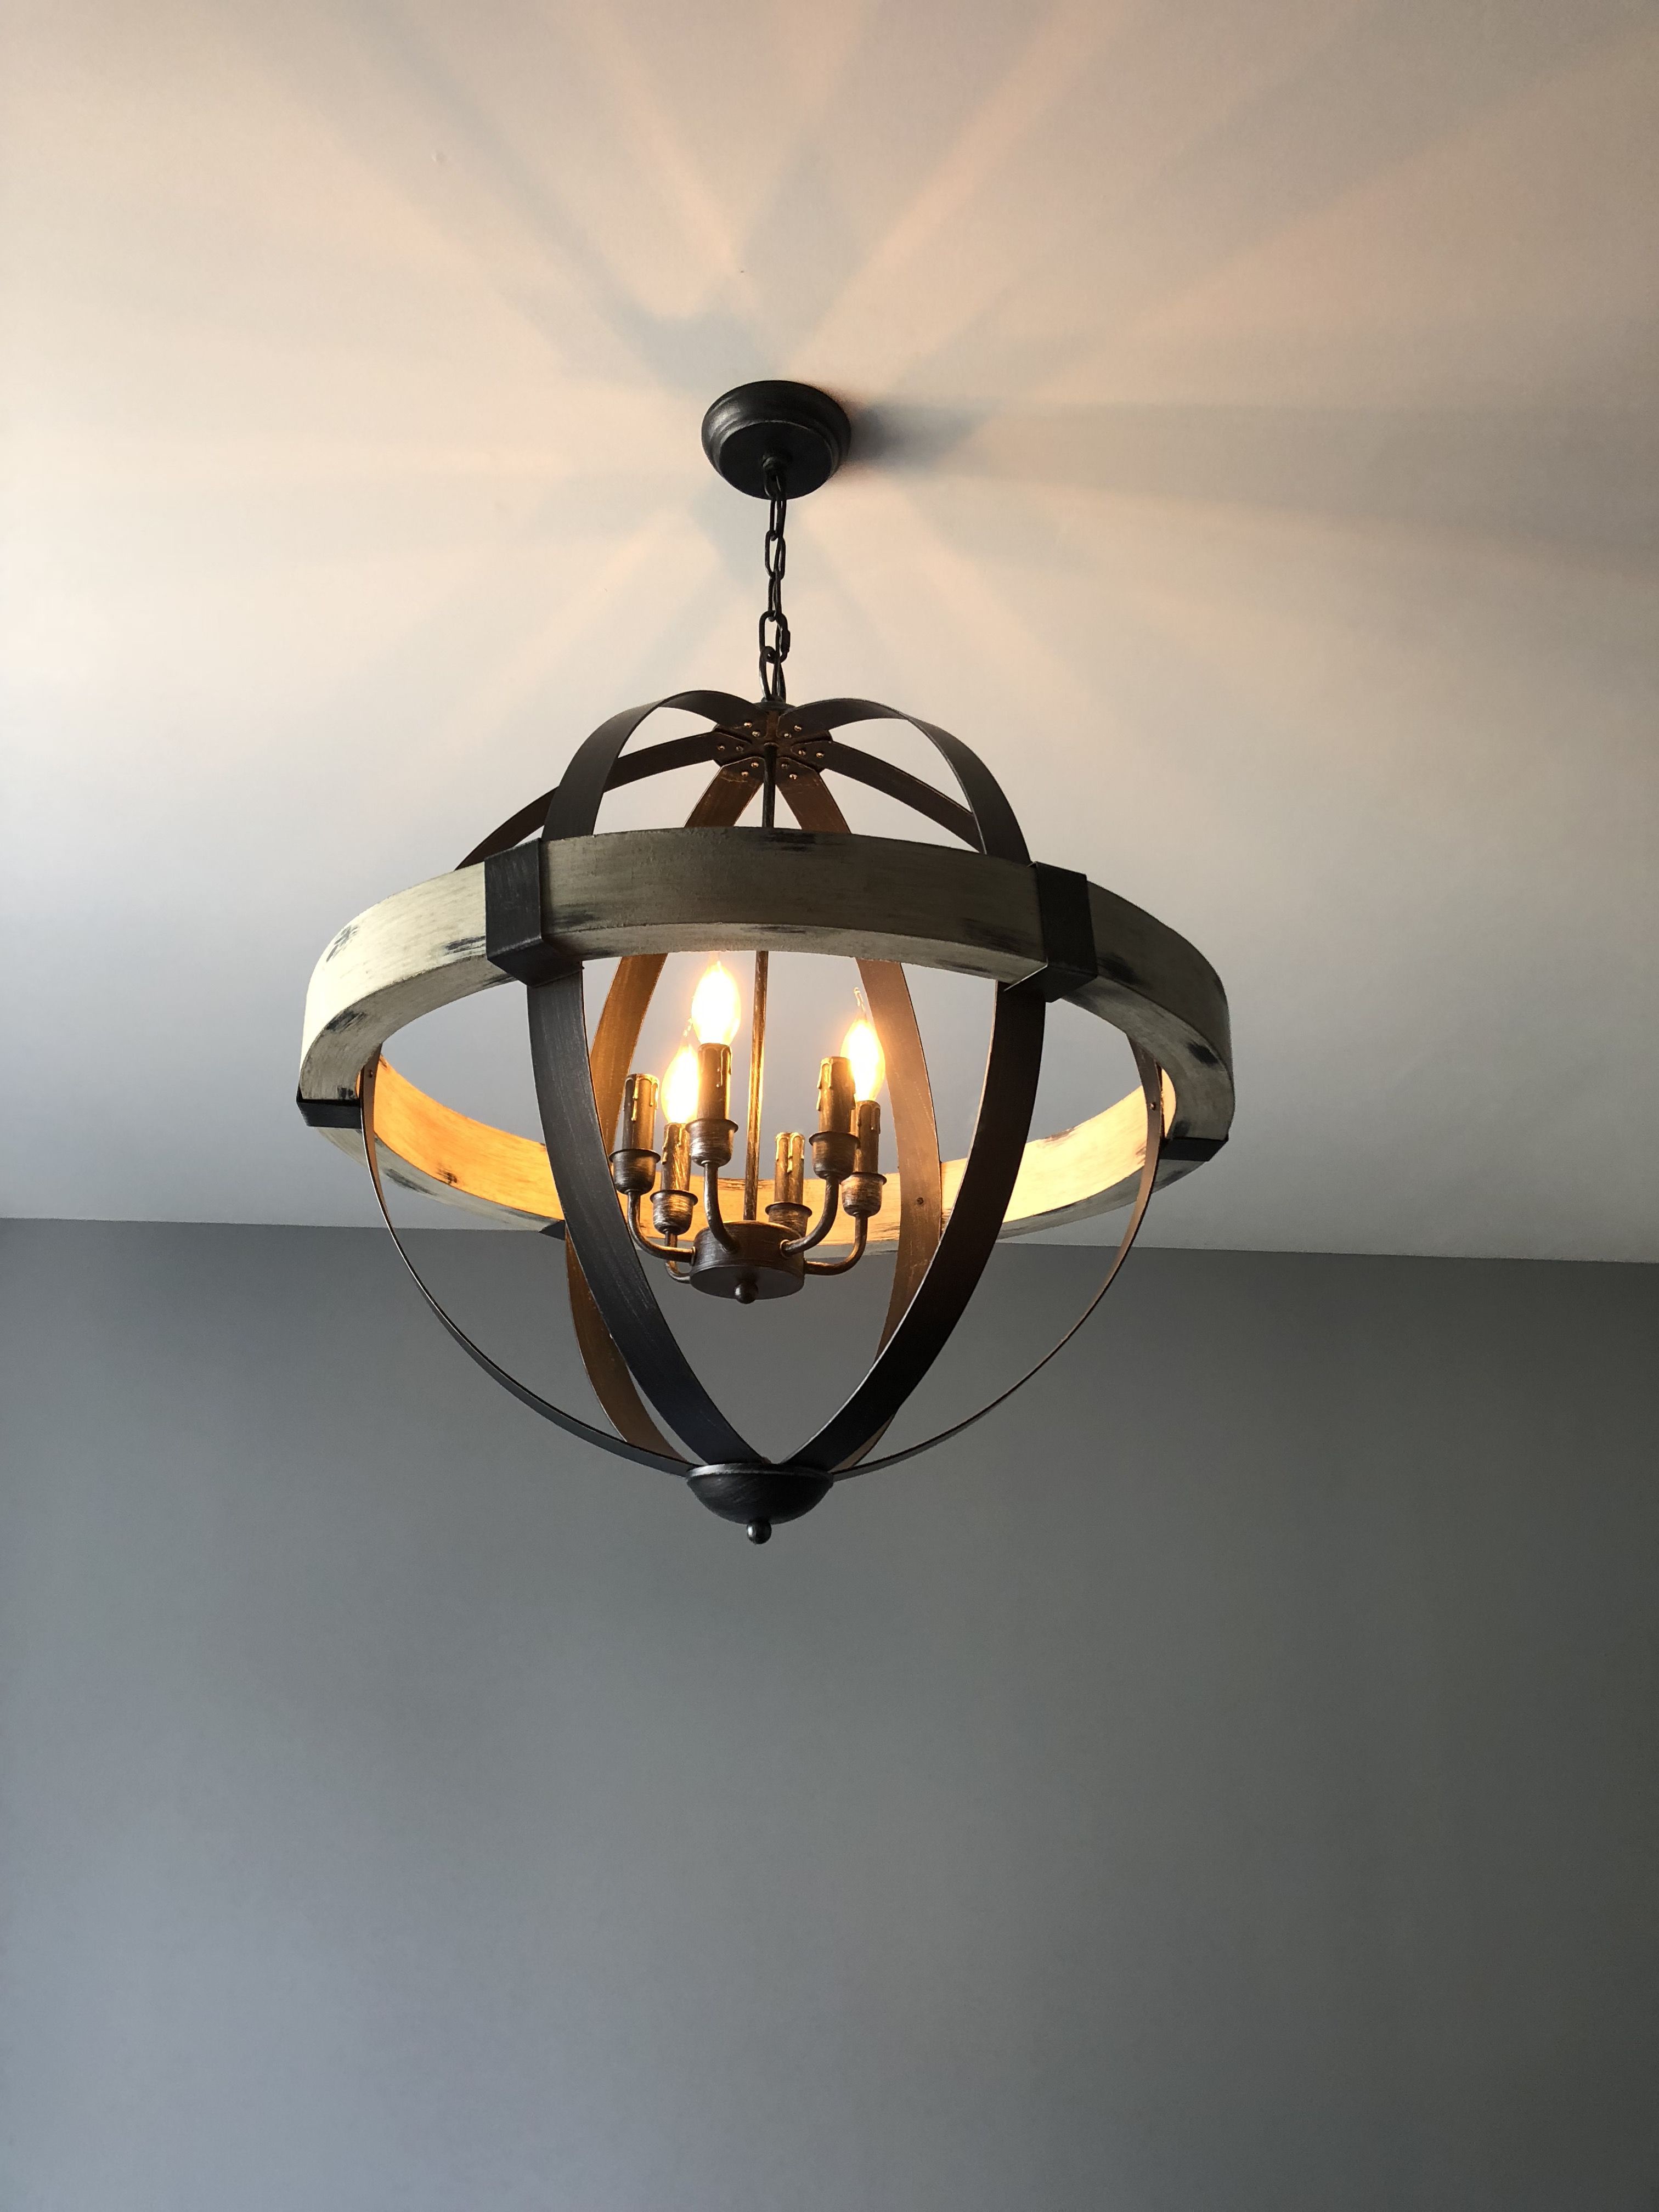 New LOW PRICE!vintage style rustic chandeliers